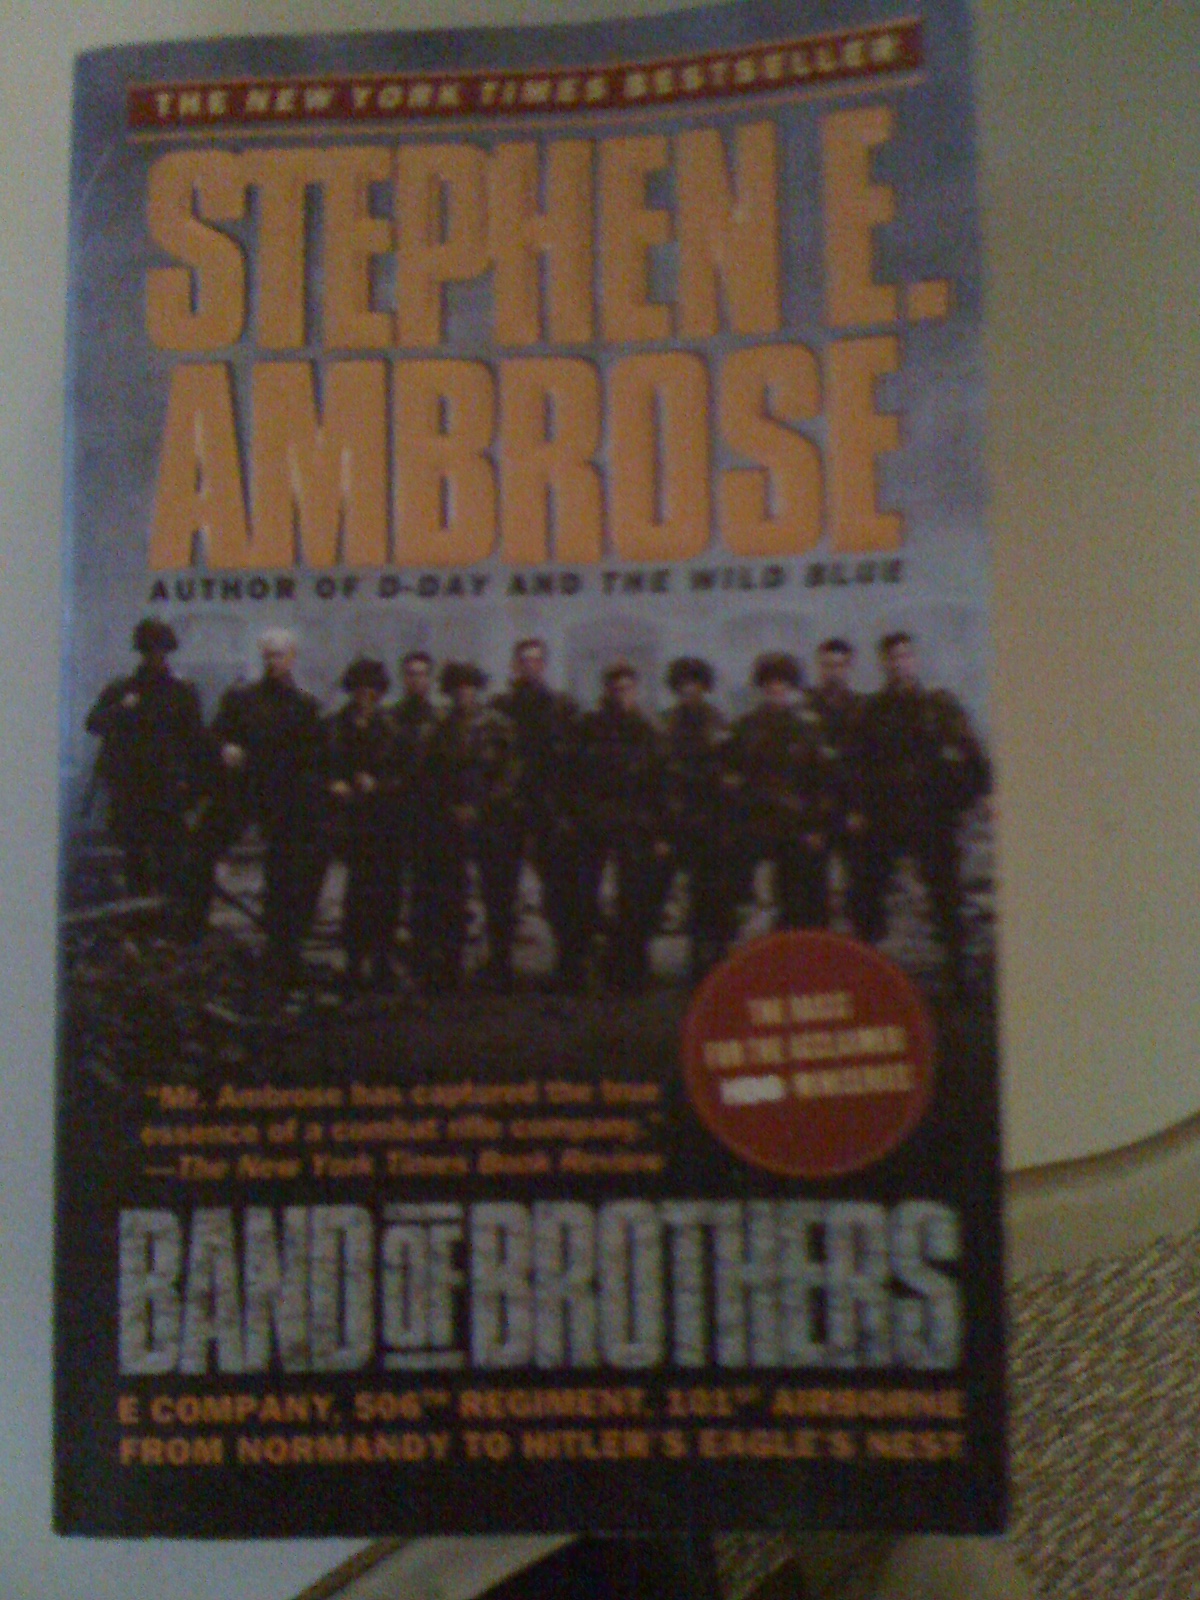 Stephen E. Ambrose- Band of Brothers